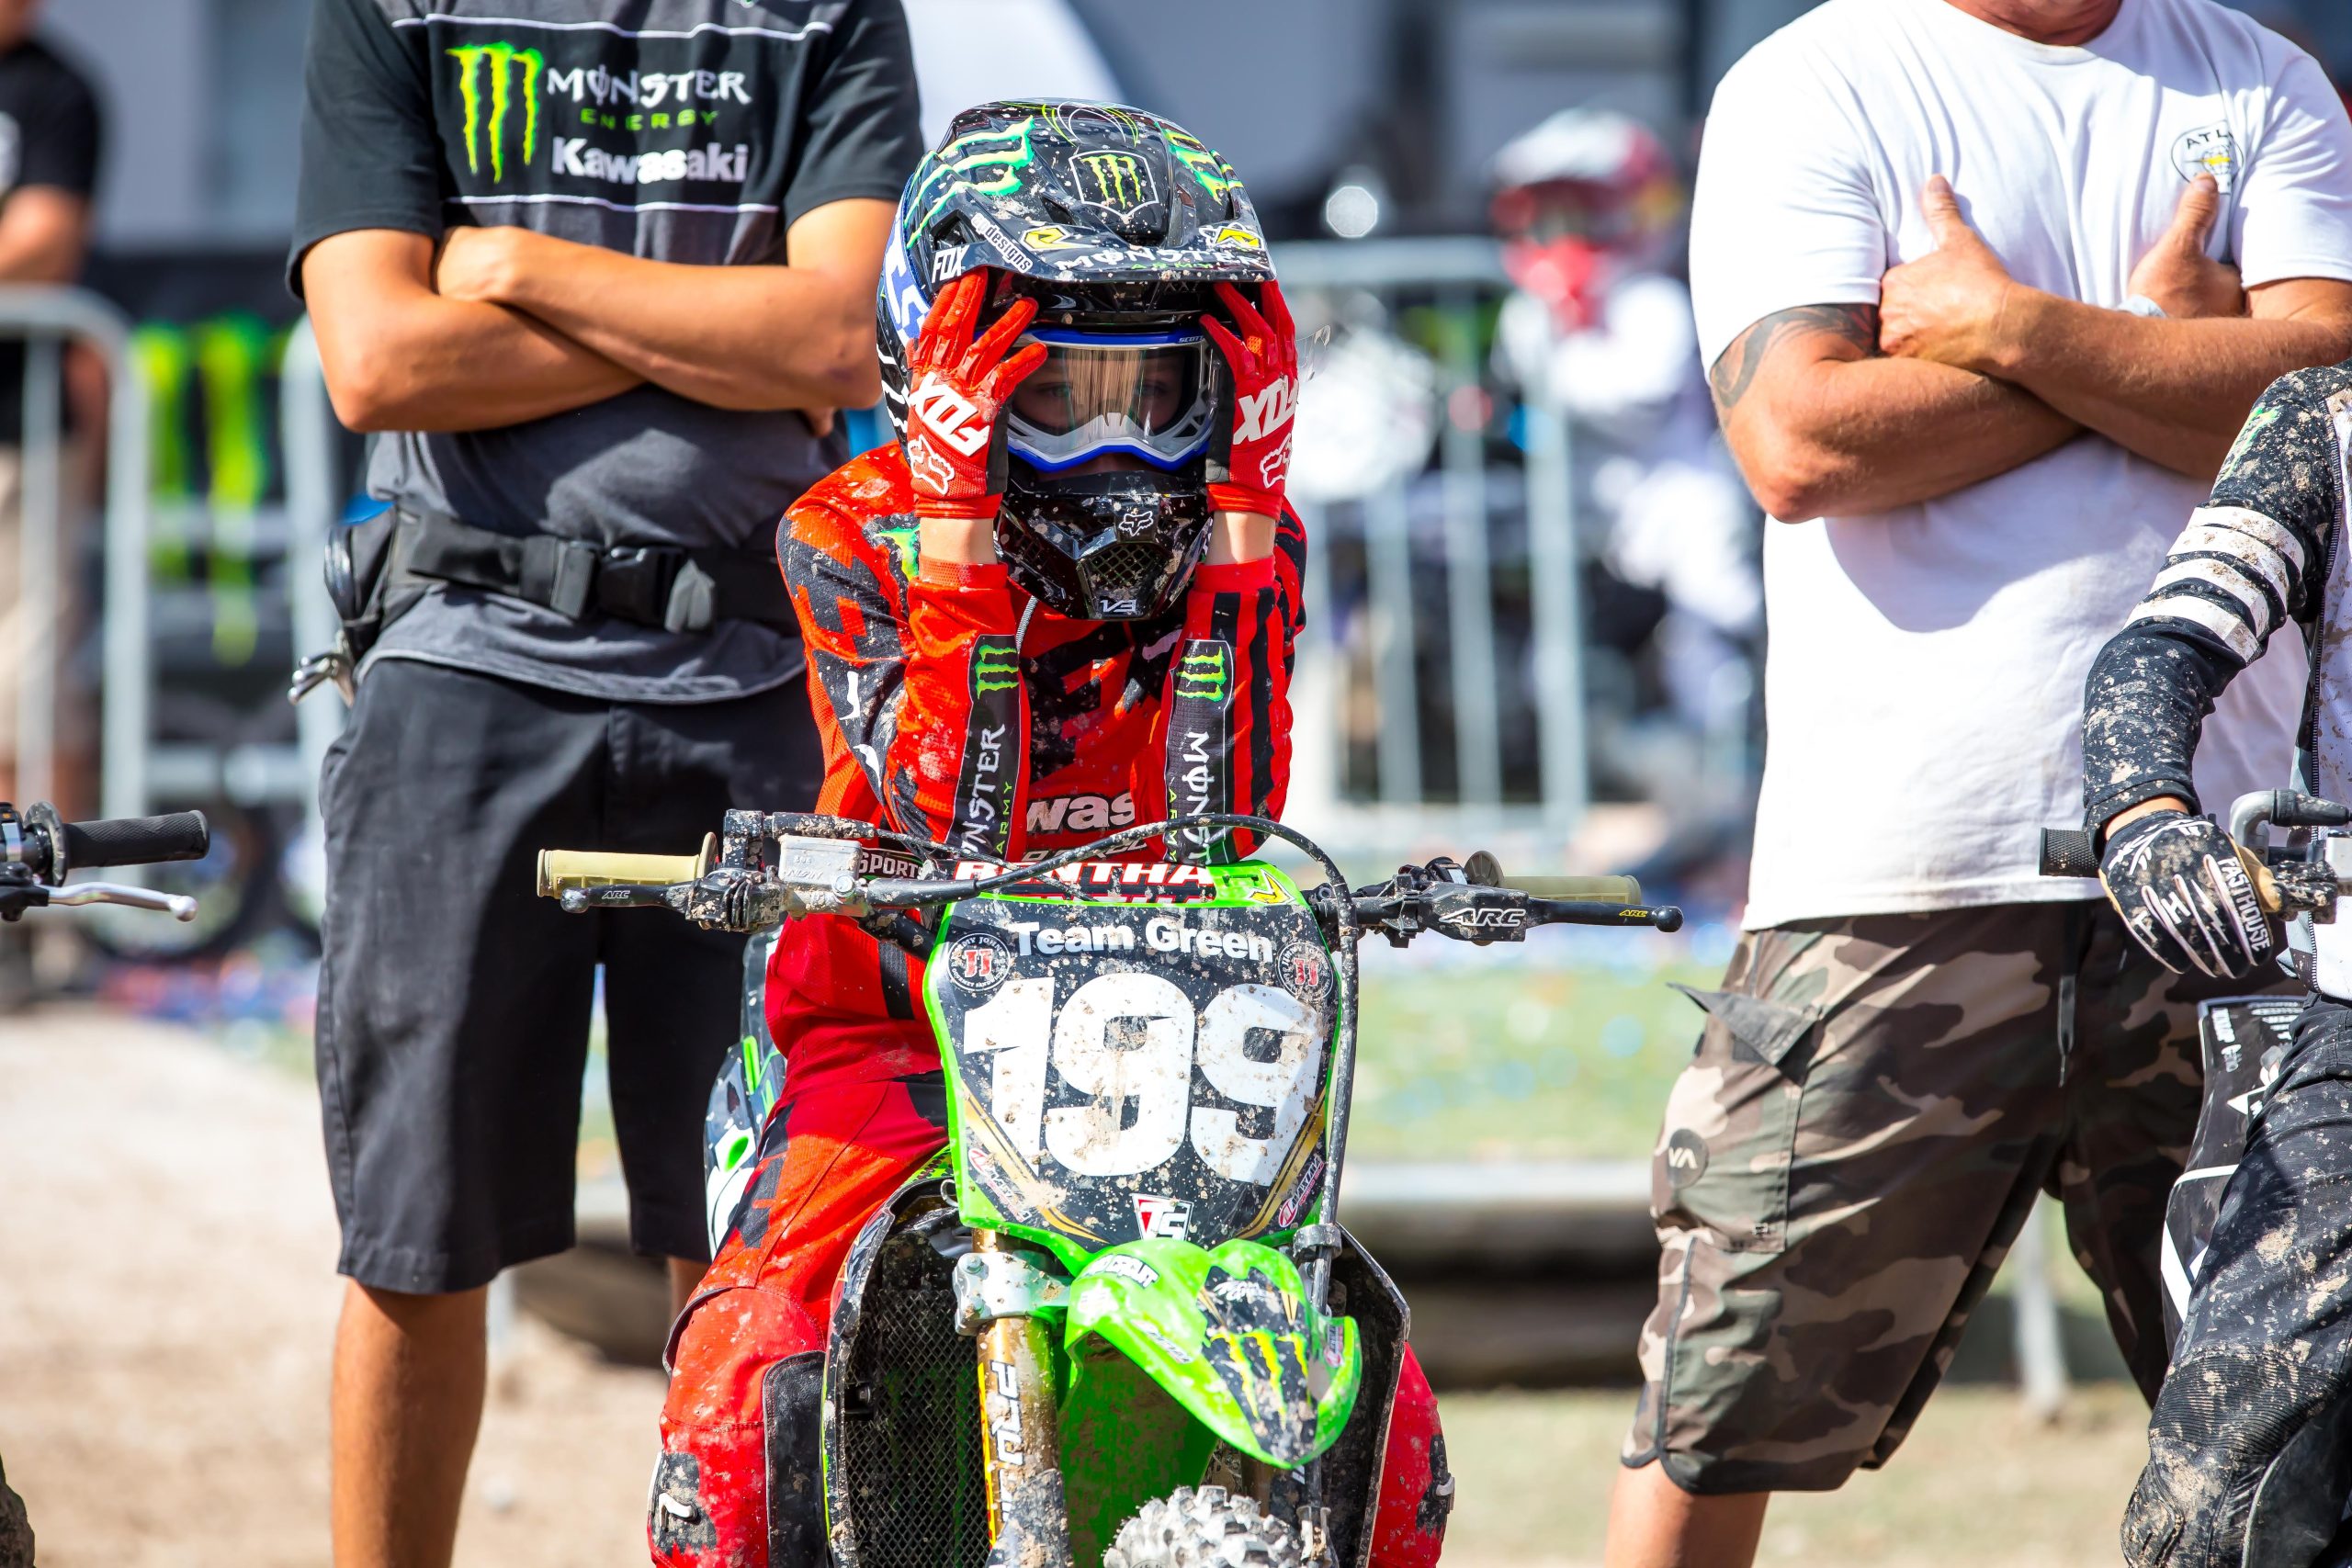 Team Green Kawasaki’s Ryder DiFrancesco getting focused on the start gate in Las Vegas at the final round of Supercross Futures at Sam Boyd Stadium. Photo Credit: Feld Entertainment